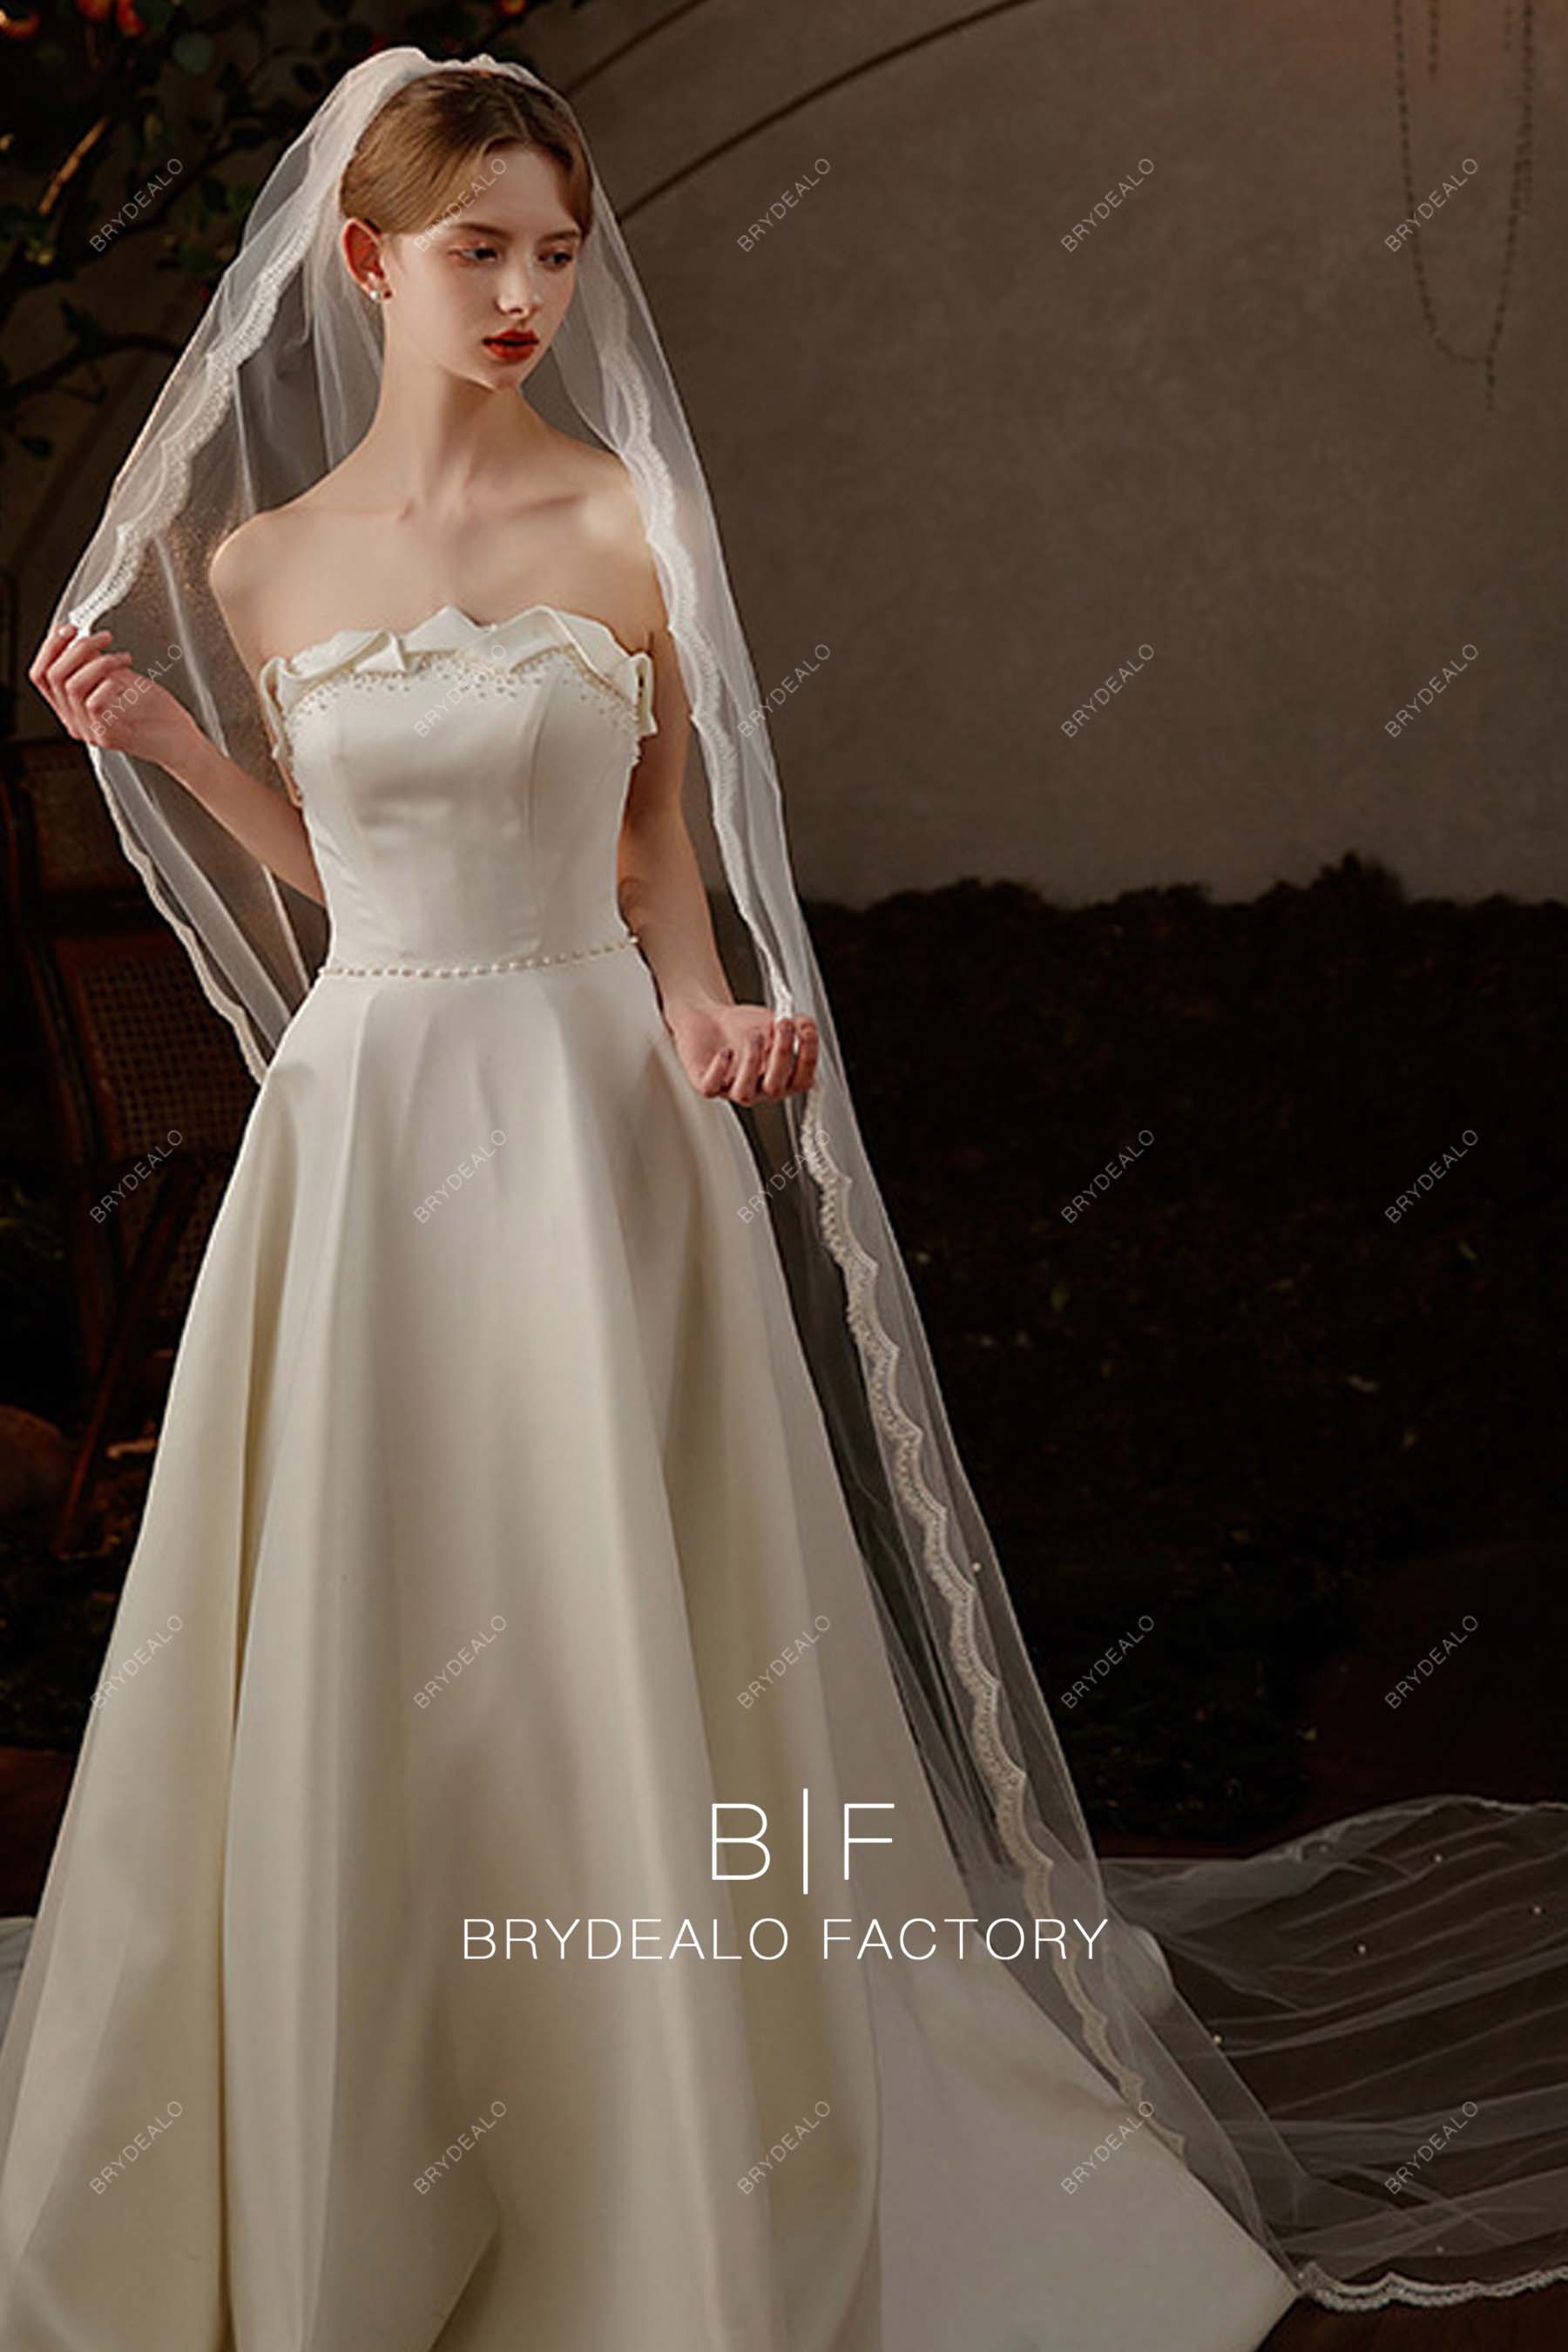 Scalloped Lace Single Layer Cathedral Length Wholesale Bridal Veil